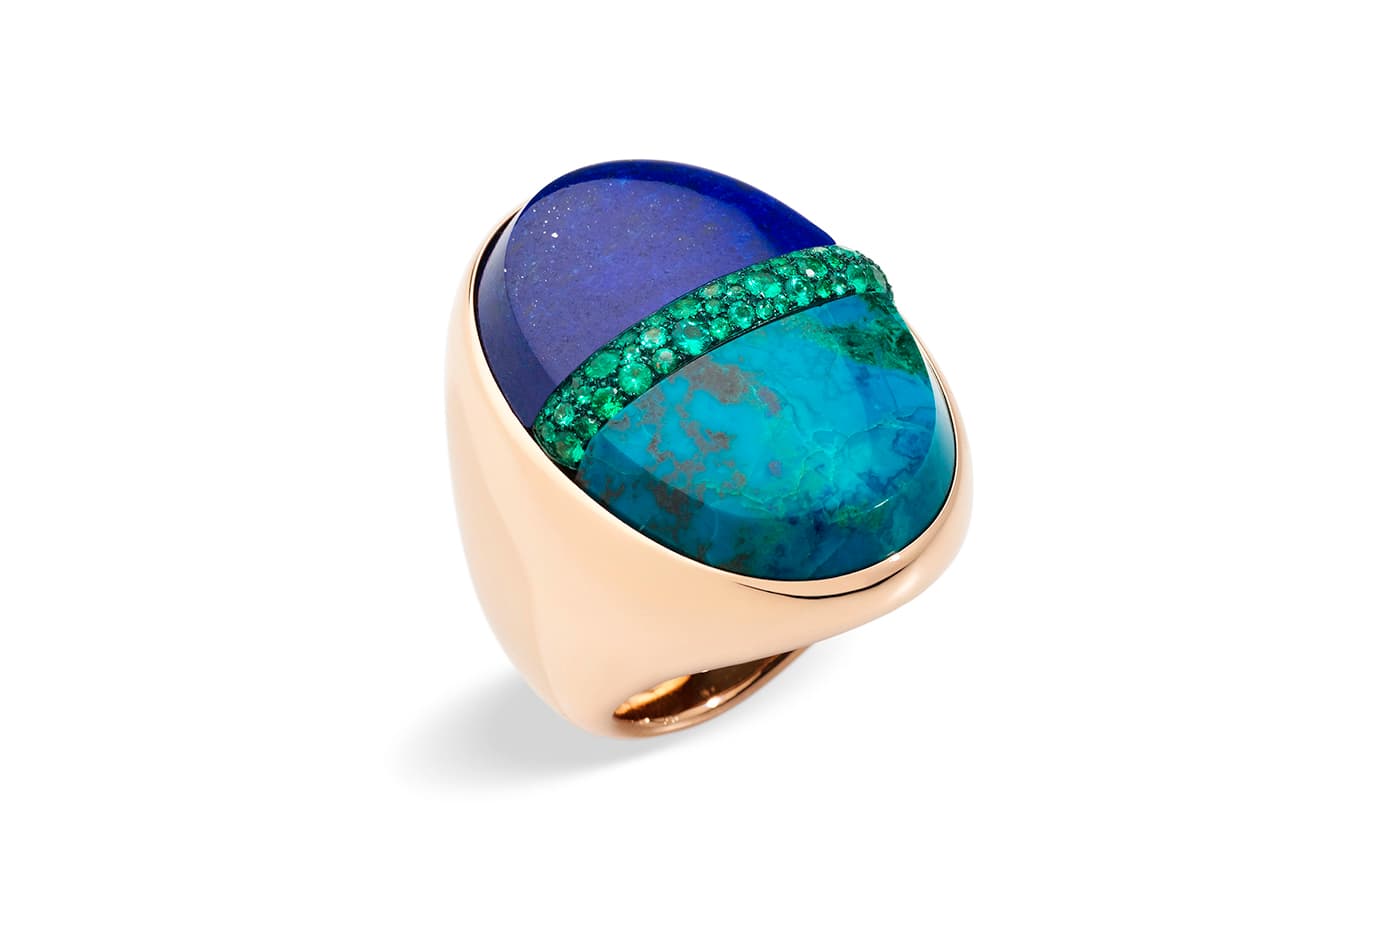 Pomellato 'Armonie Minerale' collection cocktail ring with lapis lazuli, turquoise and tsavorites in yellow gold